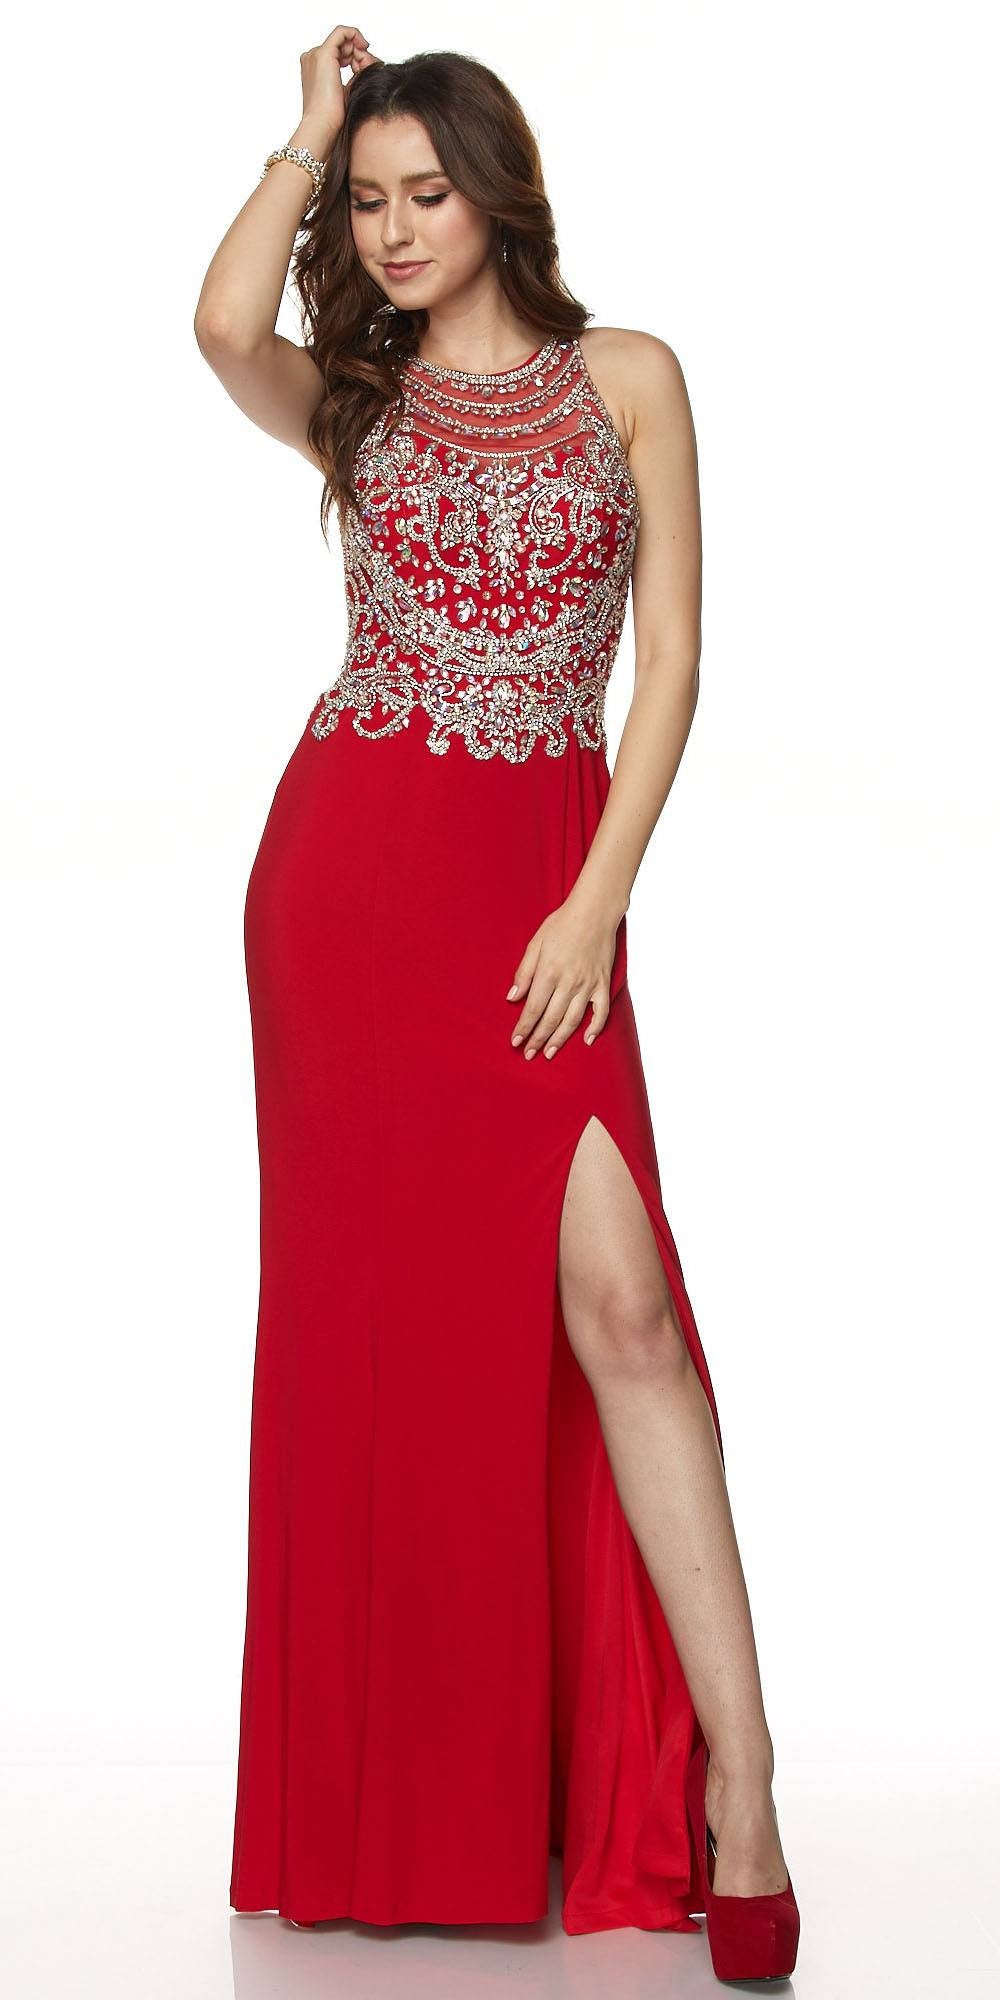 Juliet 616 Red Cut Out Back Beaded Bodice Prom Gown with Train 